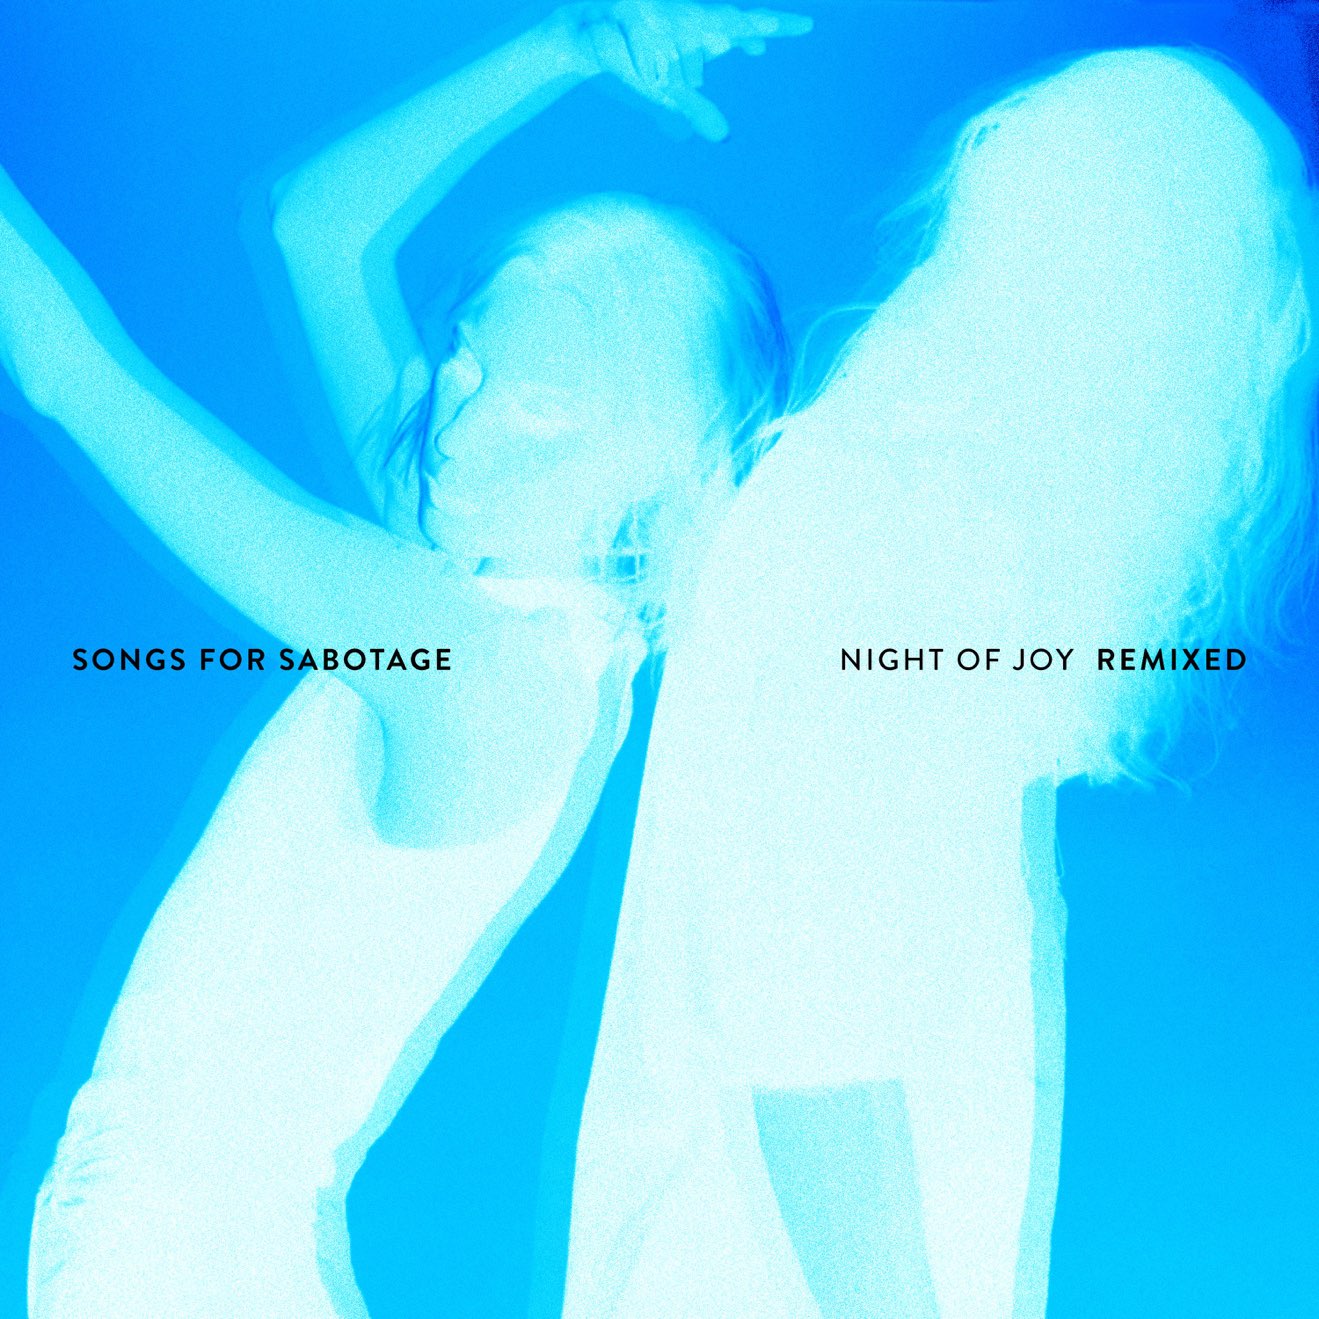 Songs for Sabotage – Night of Joy (Remixed) (2020) [iTunes Match M4A]